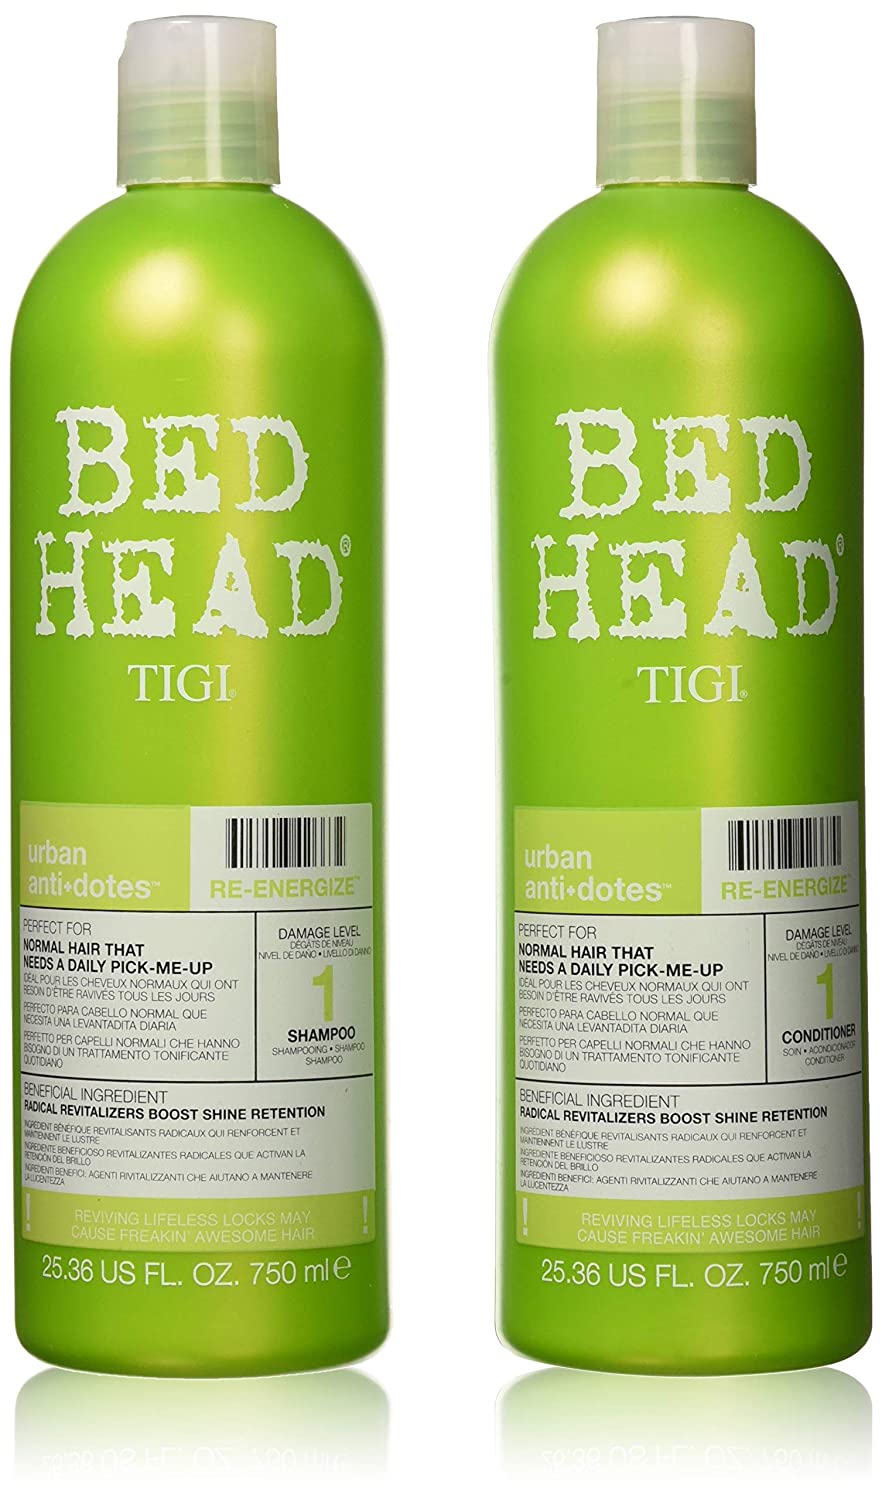 Wholesale Bed Head Renergize Shampoo and Conditioner Duo, 25.36 oz | Supply Leader — Wholesale Supply